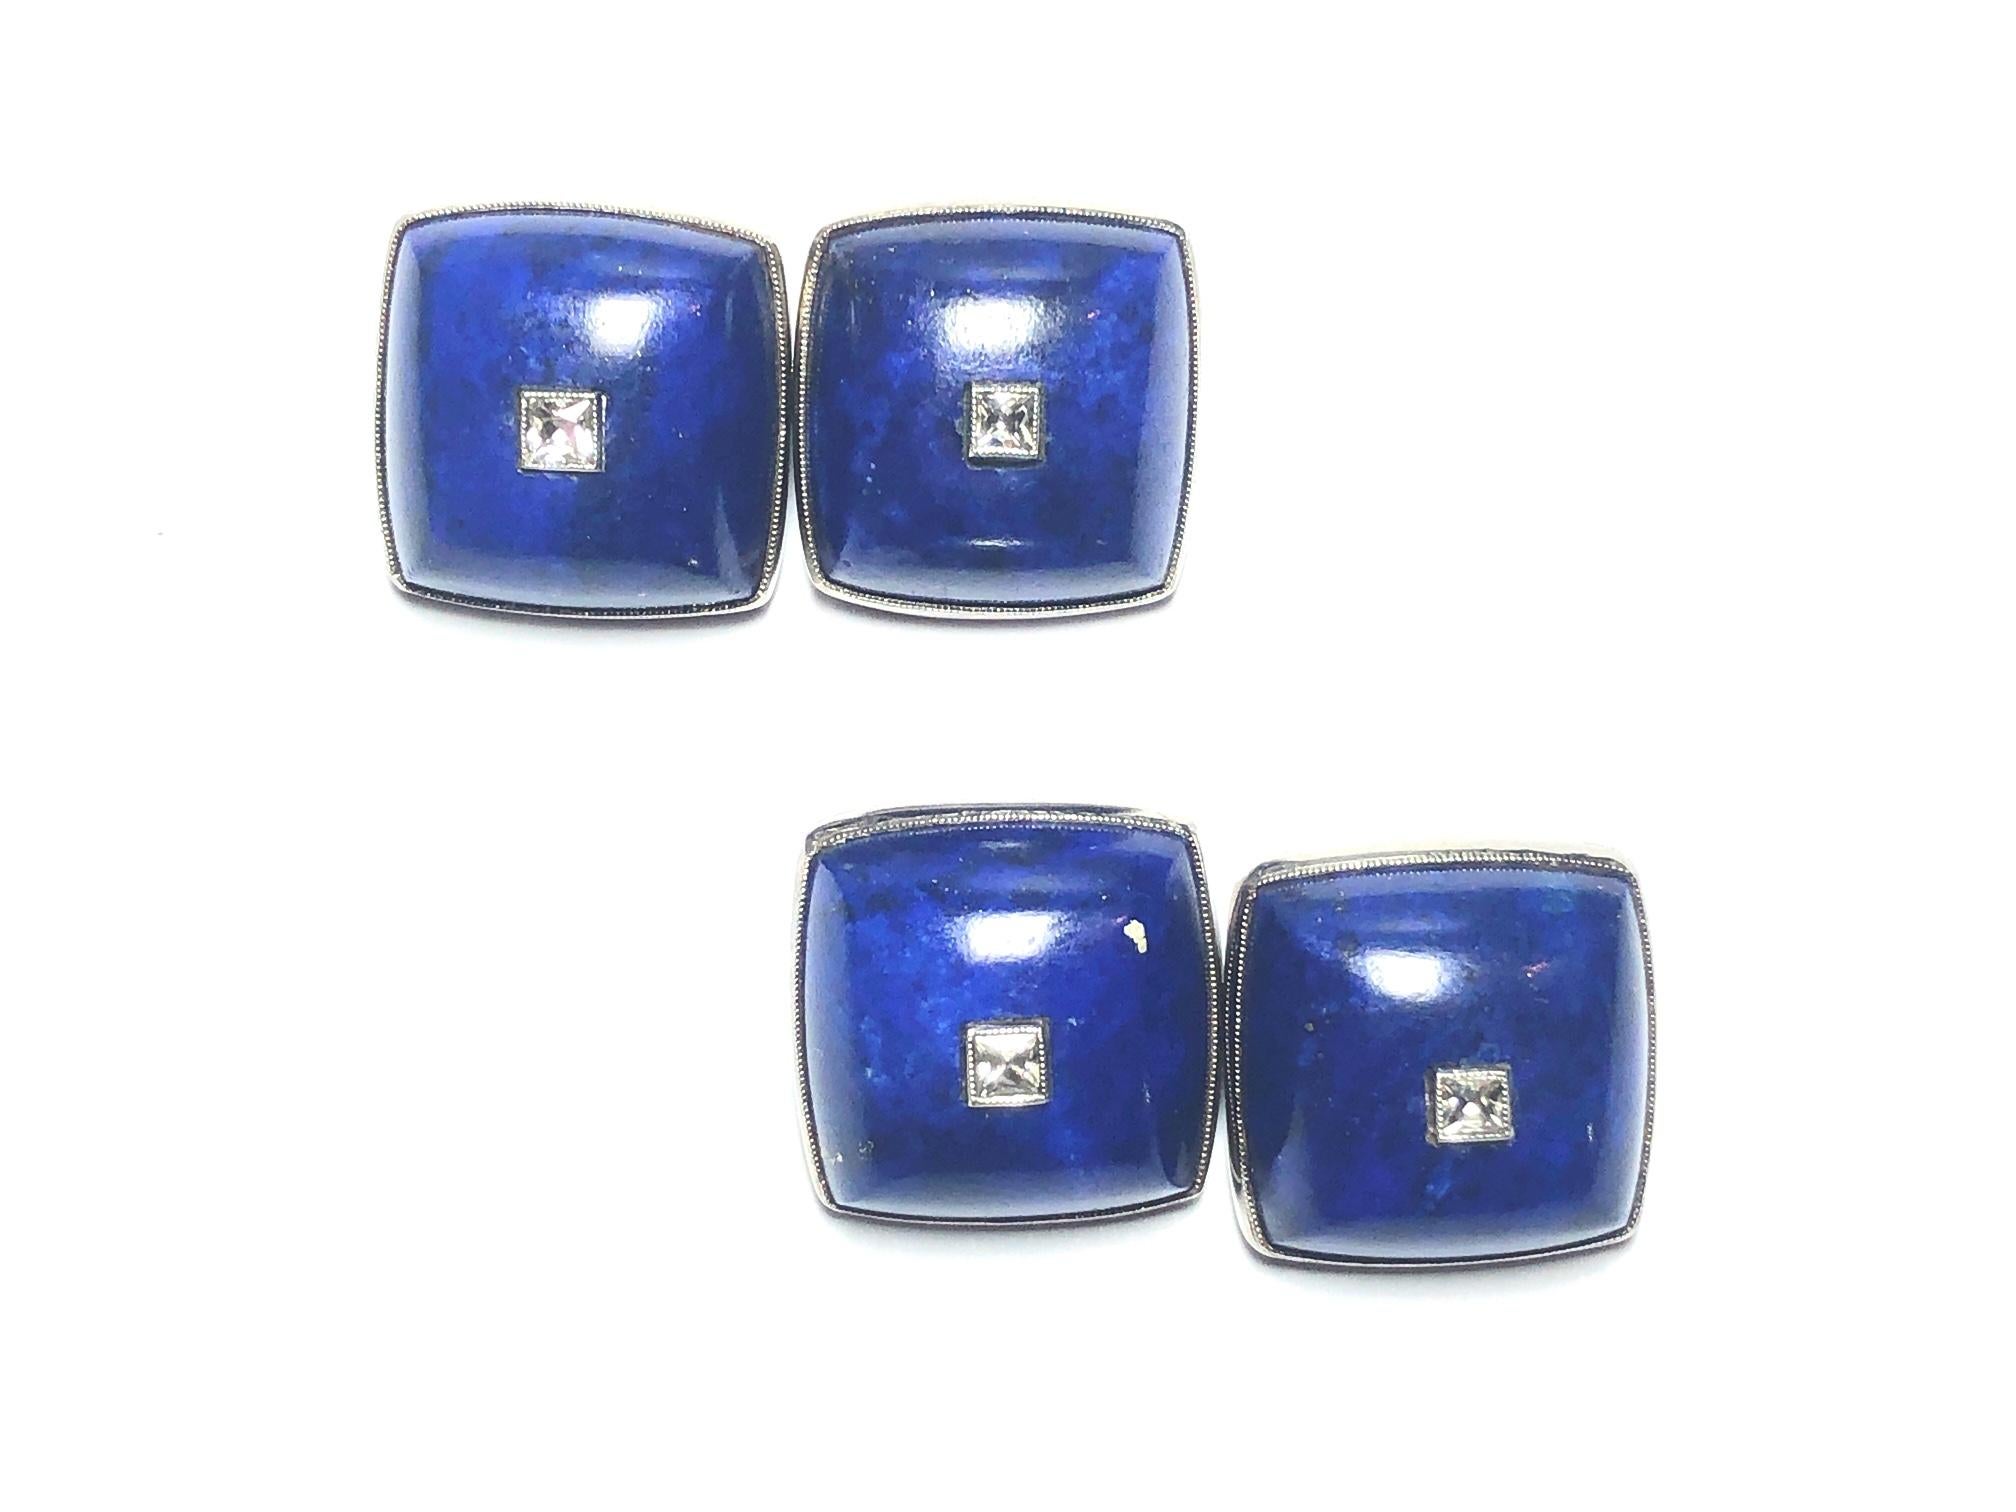 A pair of vintage lapis lazuli and diamond cufflinks, with French-cut diamonds, in the centre of cushion shaped lapis lazuli, in rub-over settings, with millegrain edges, mounted in 18ct white gold, with bar links, circa 1950.